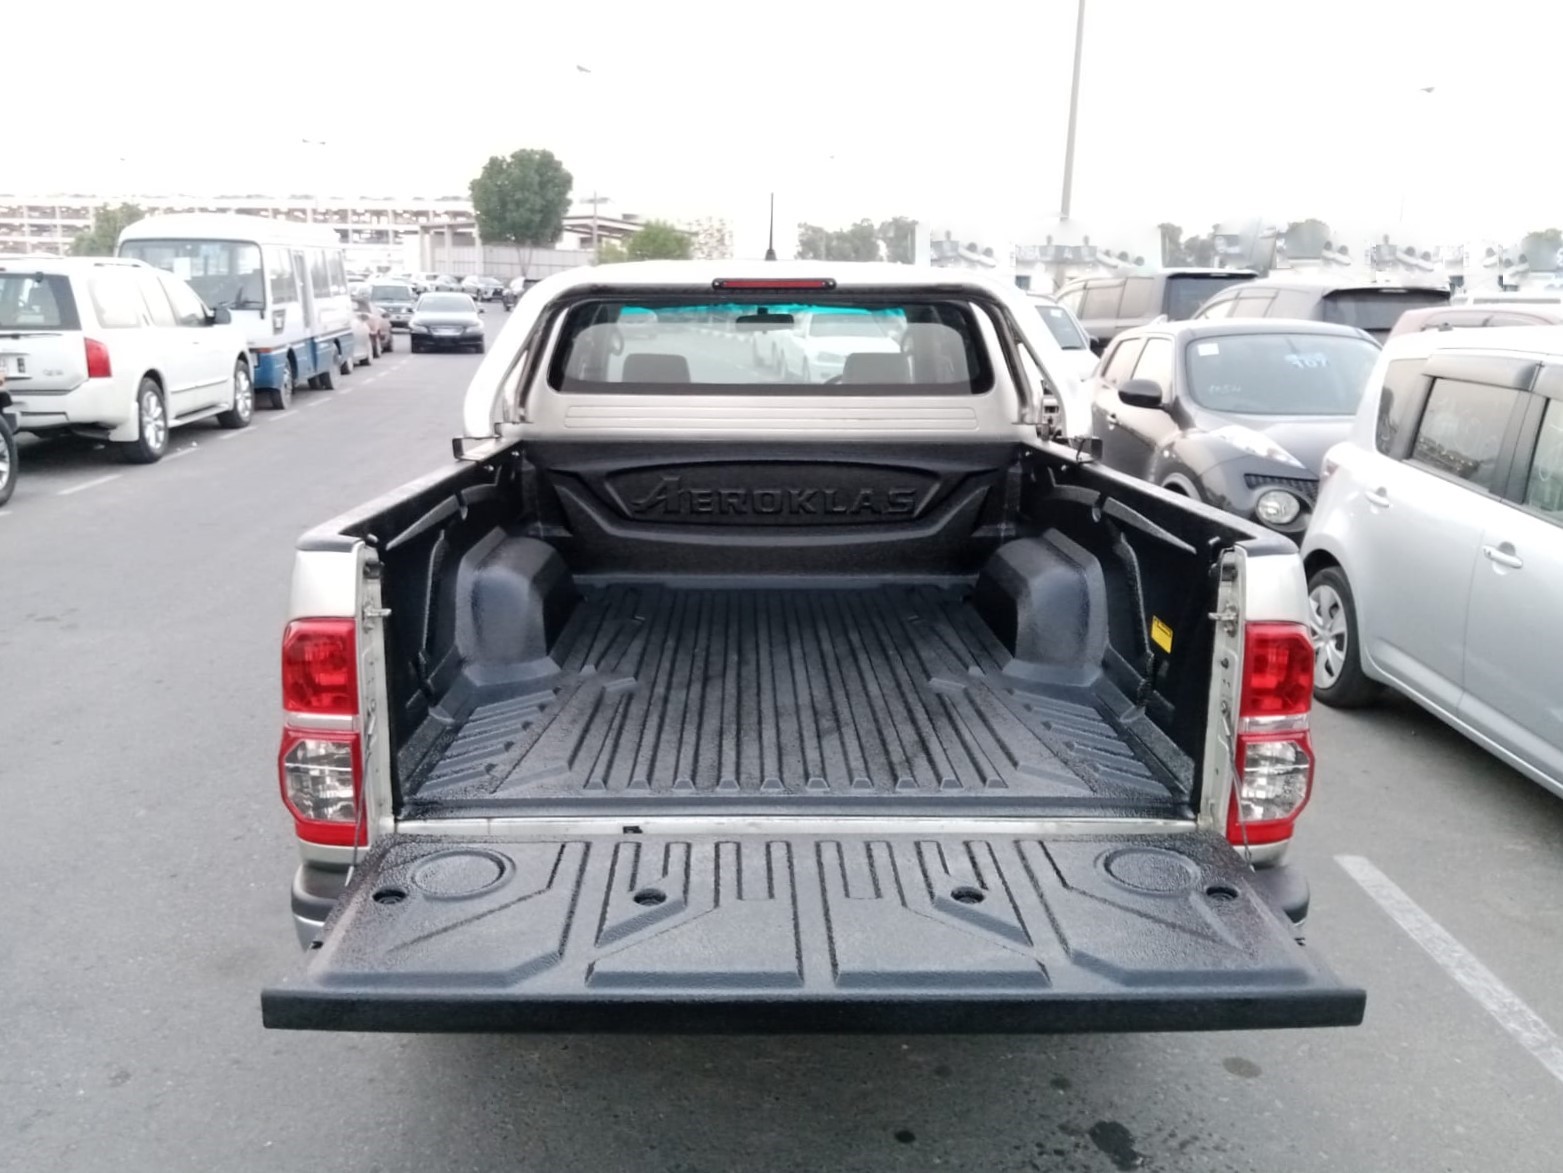 6221 TOYOTA HILUX PICK UP MT 3.0 SILVER